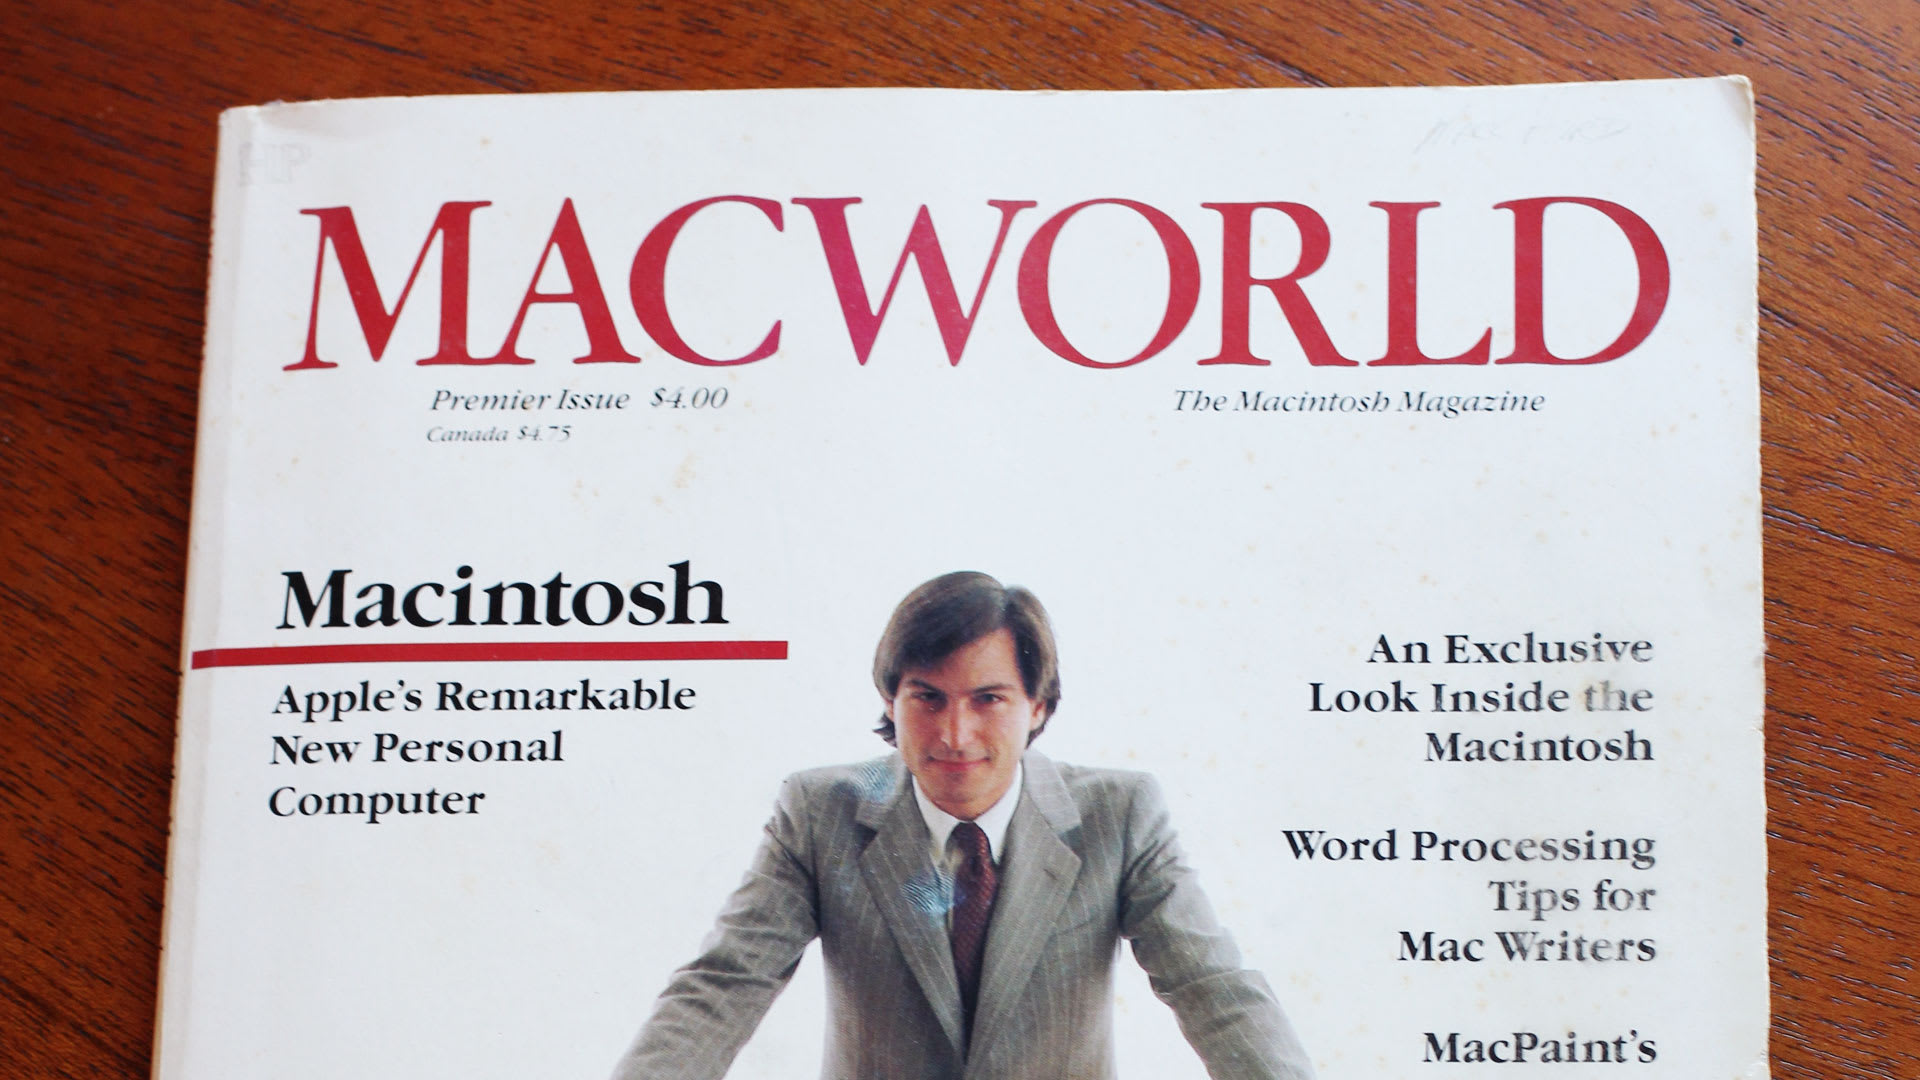 After 30 Years, Macworld Is No Longer A Magazine - Fast Company